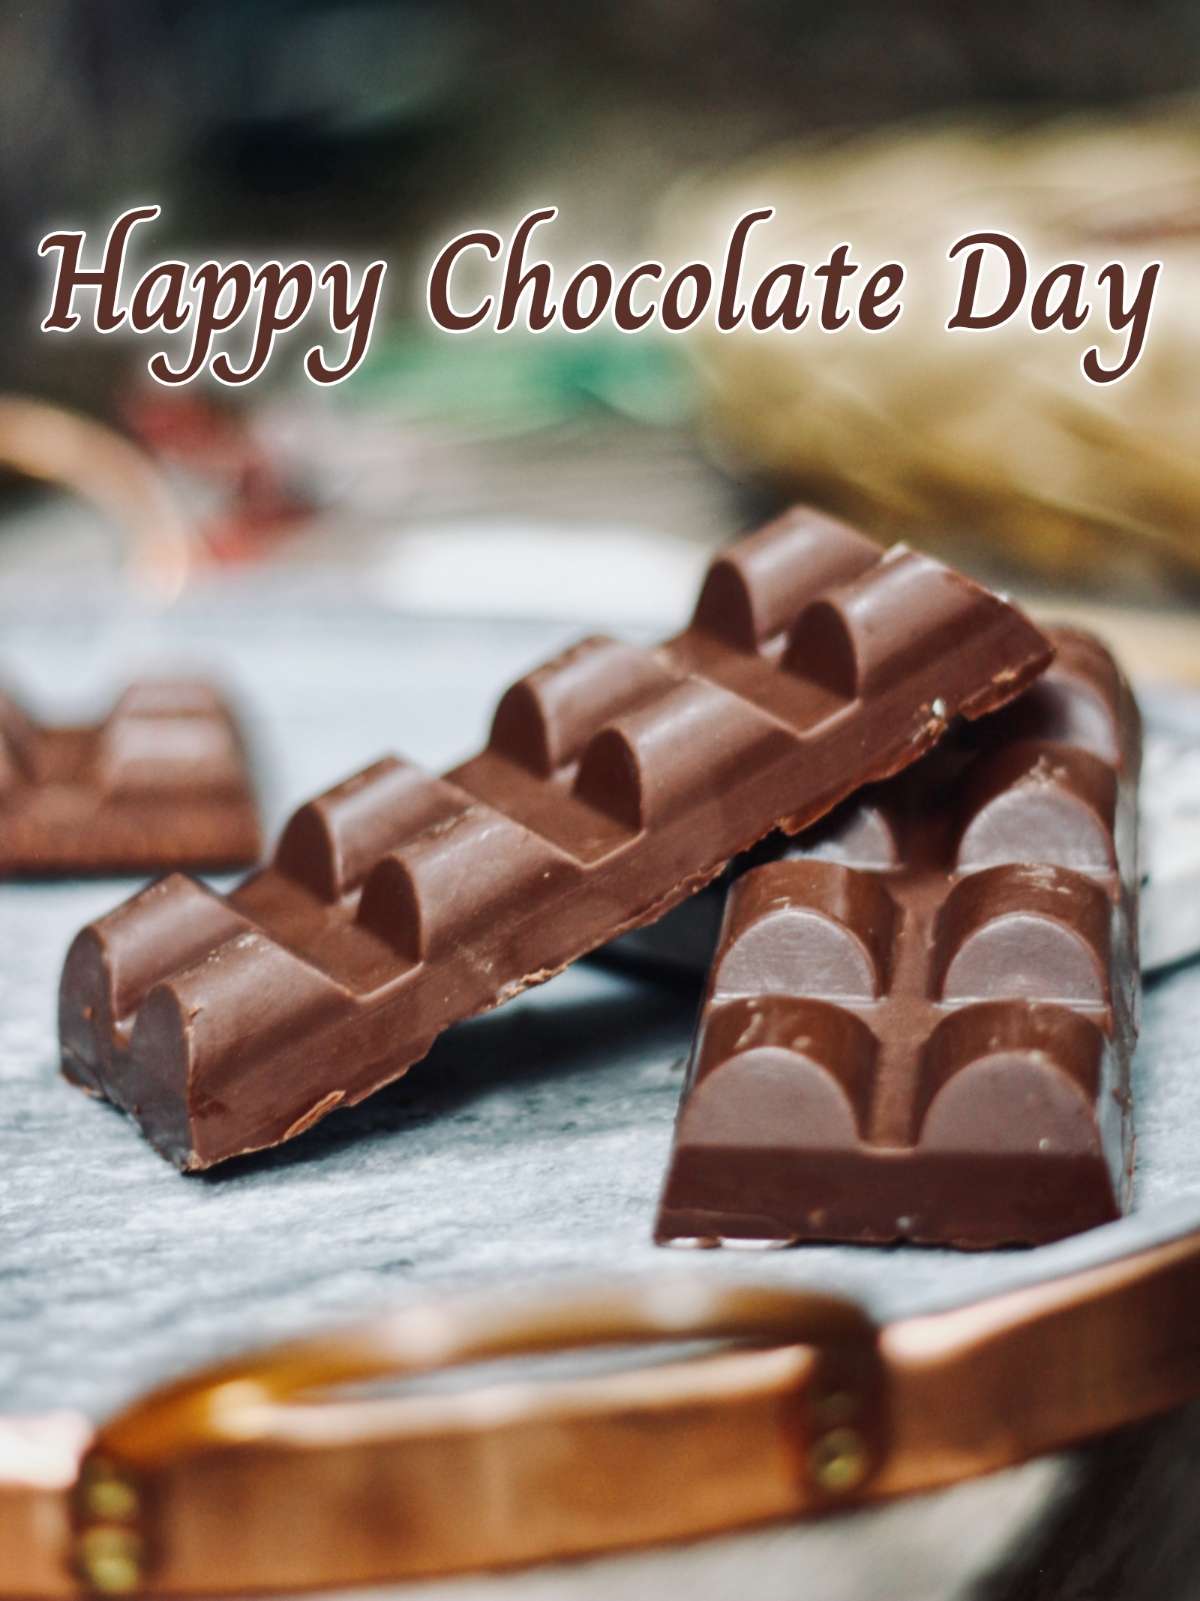 Chocolate Day Hd Images Download